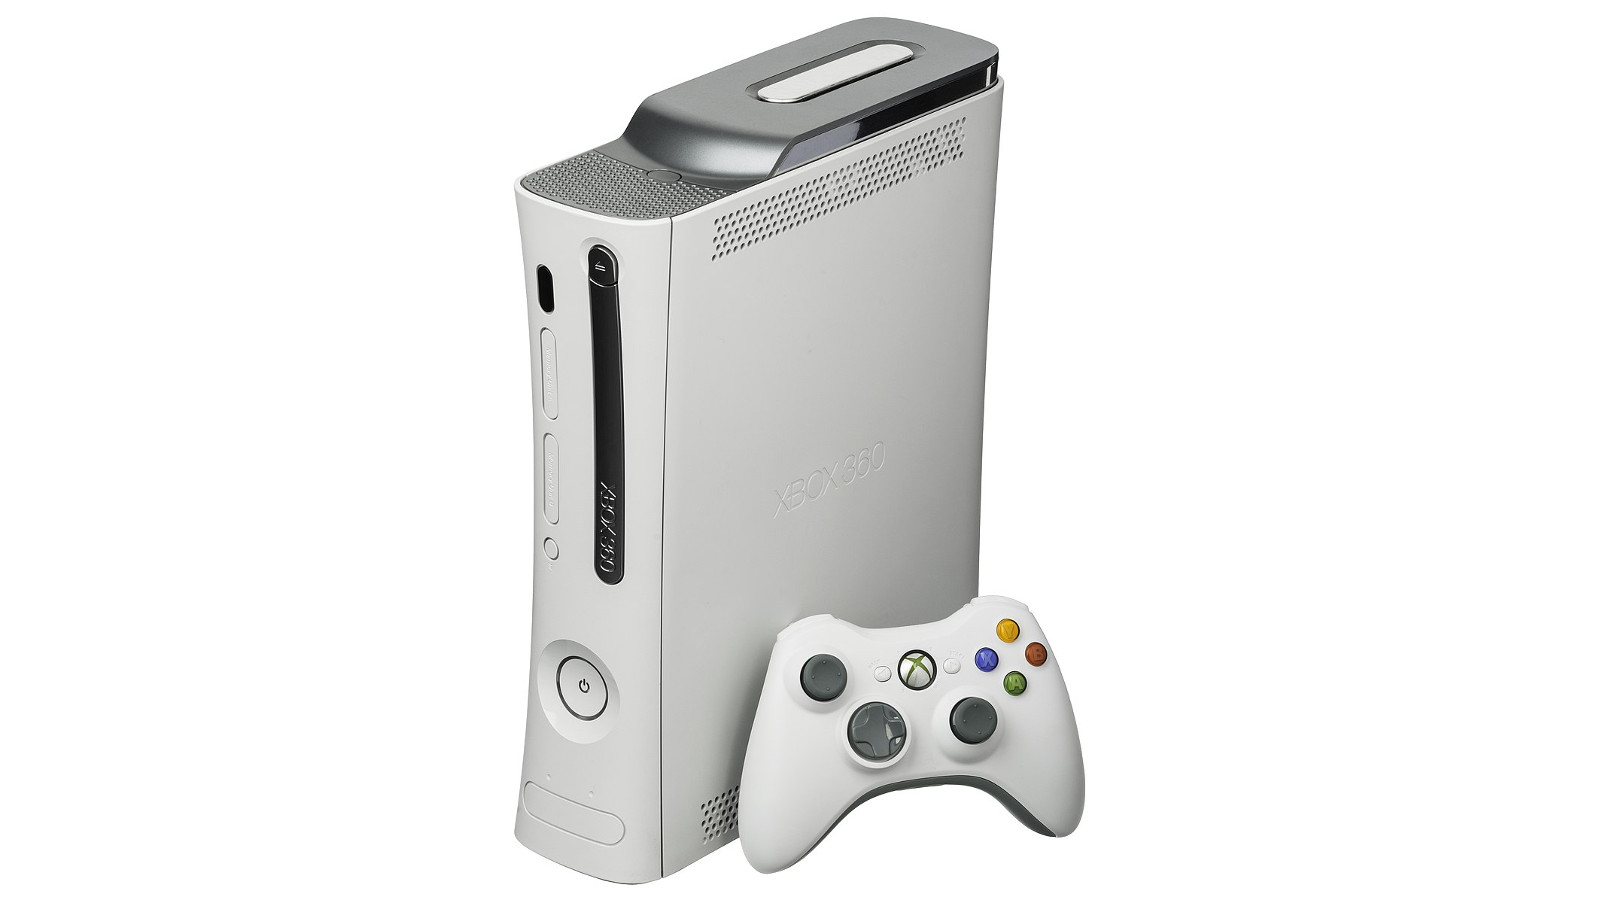 Xbox 360 with controller.